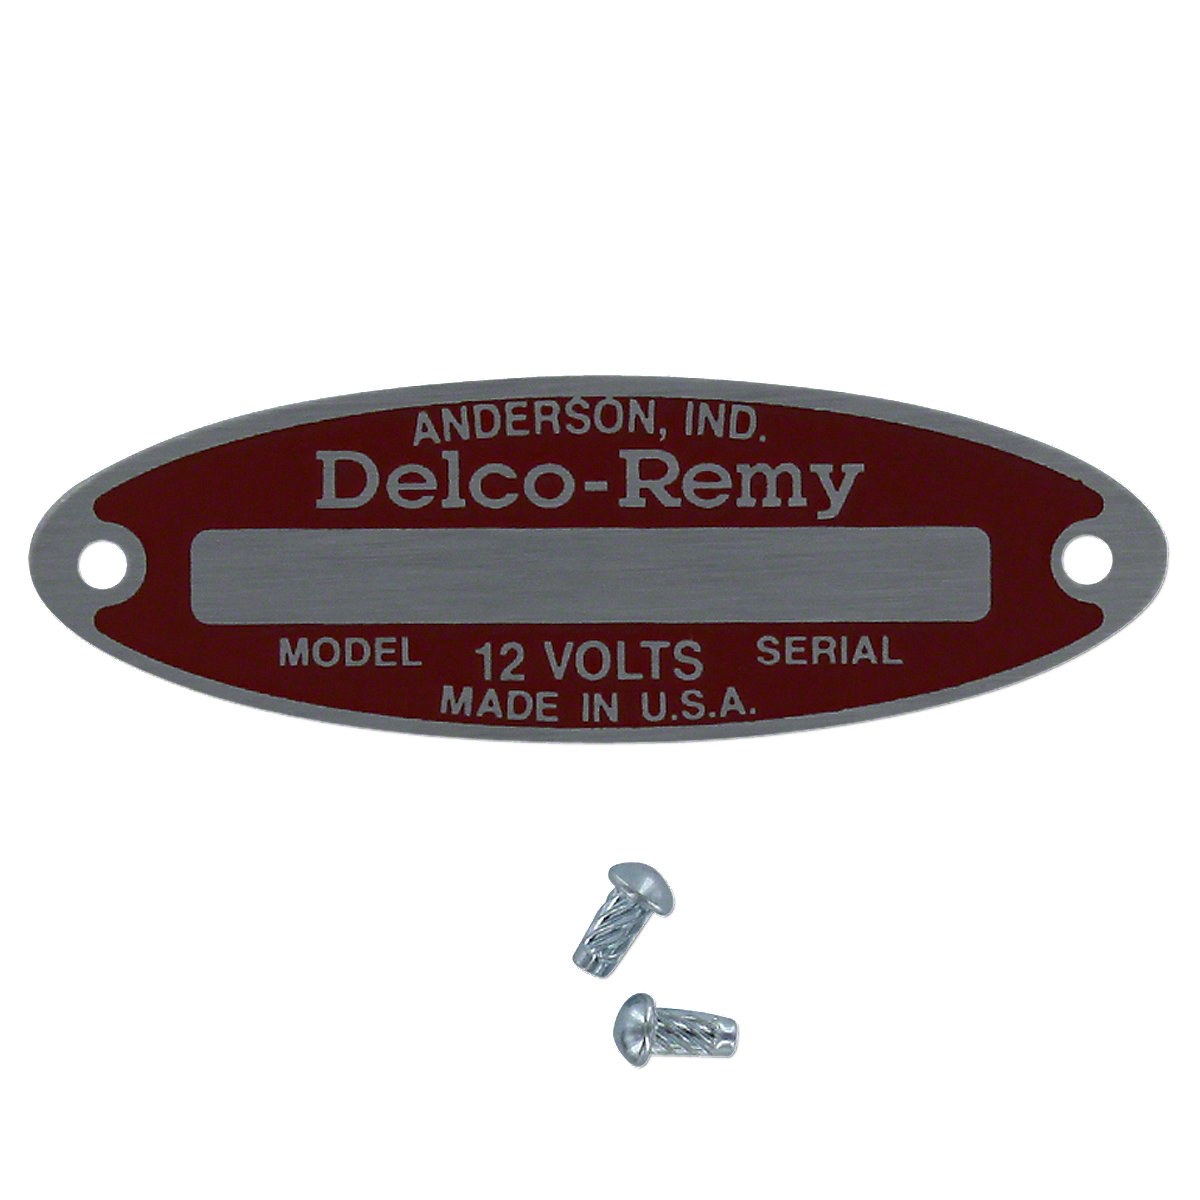 Blank Delco Remy Starter Tag For Massey Ferguson And Massey Harris Tractors. 